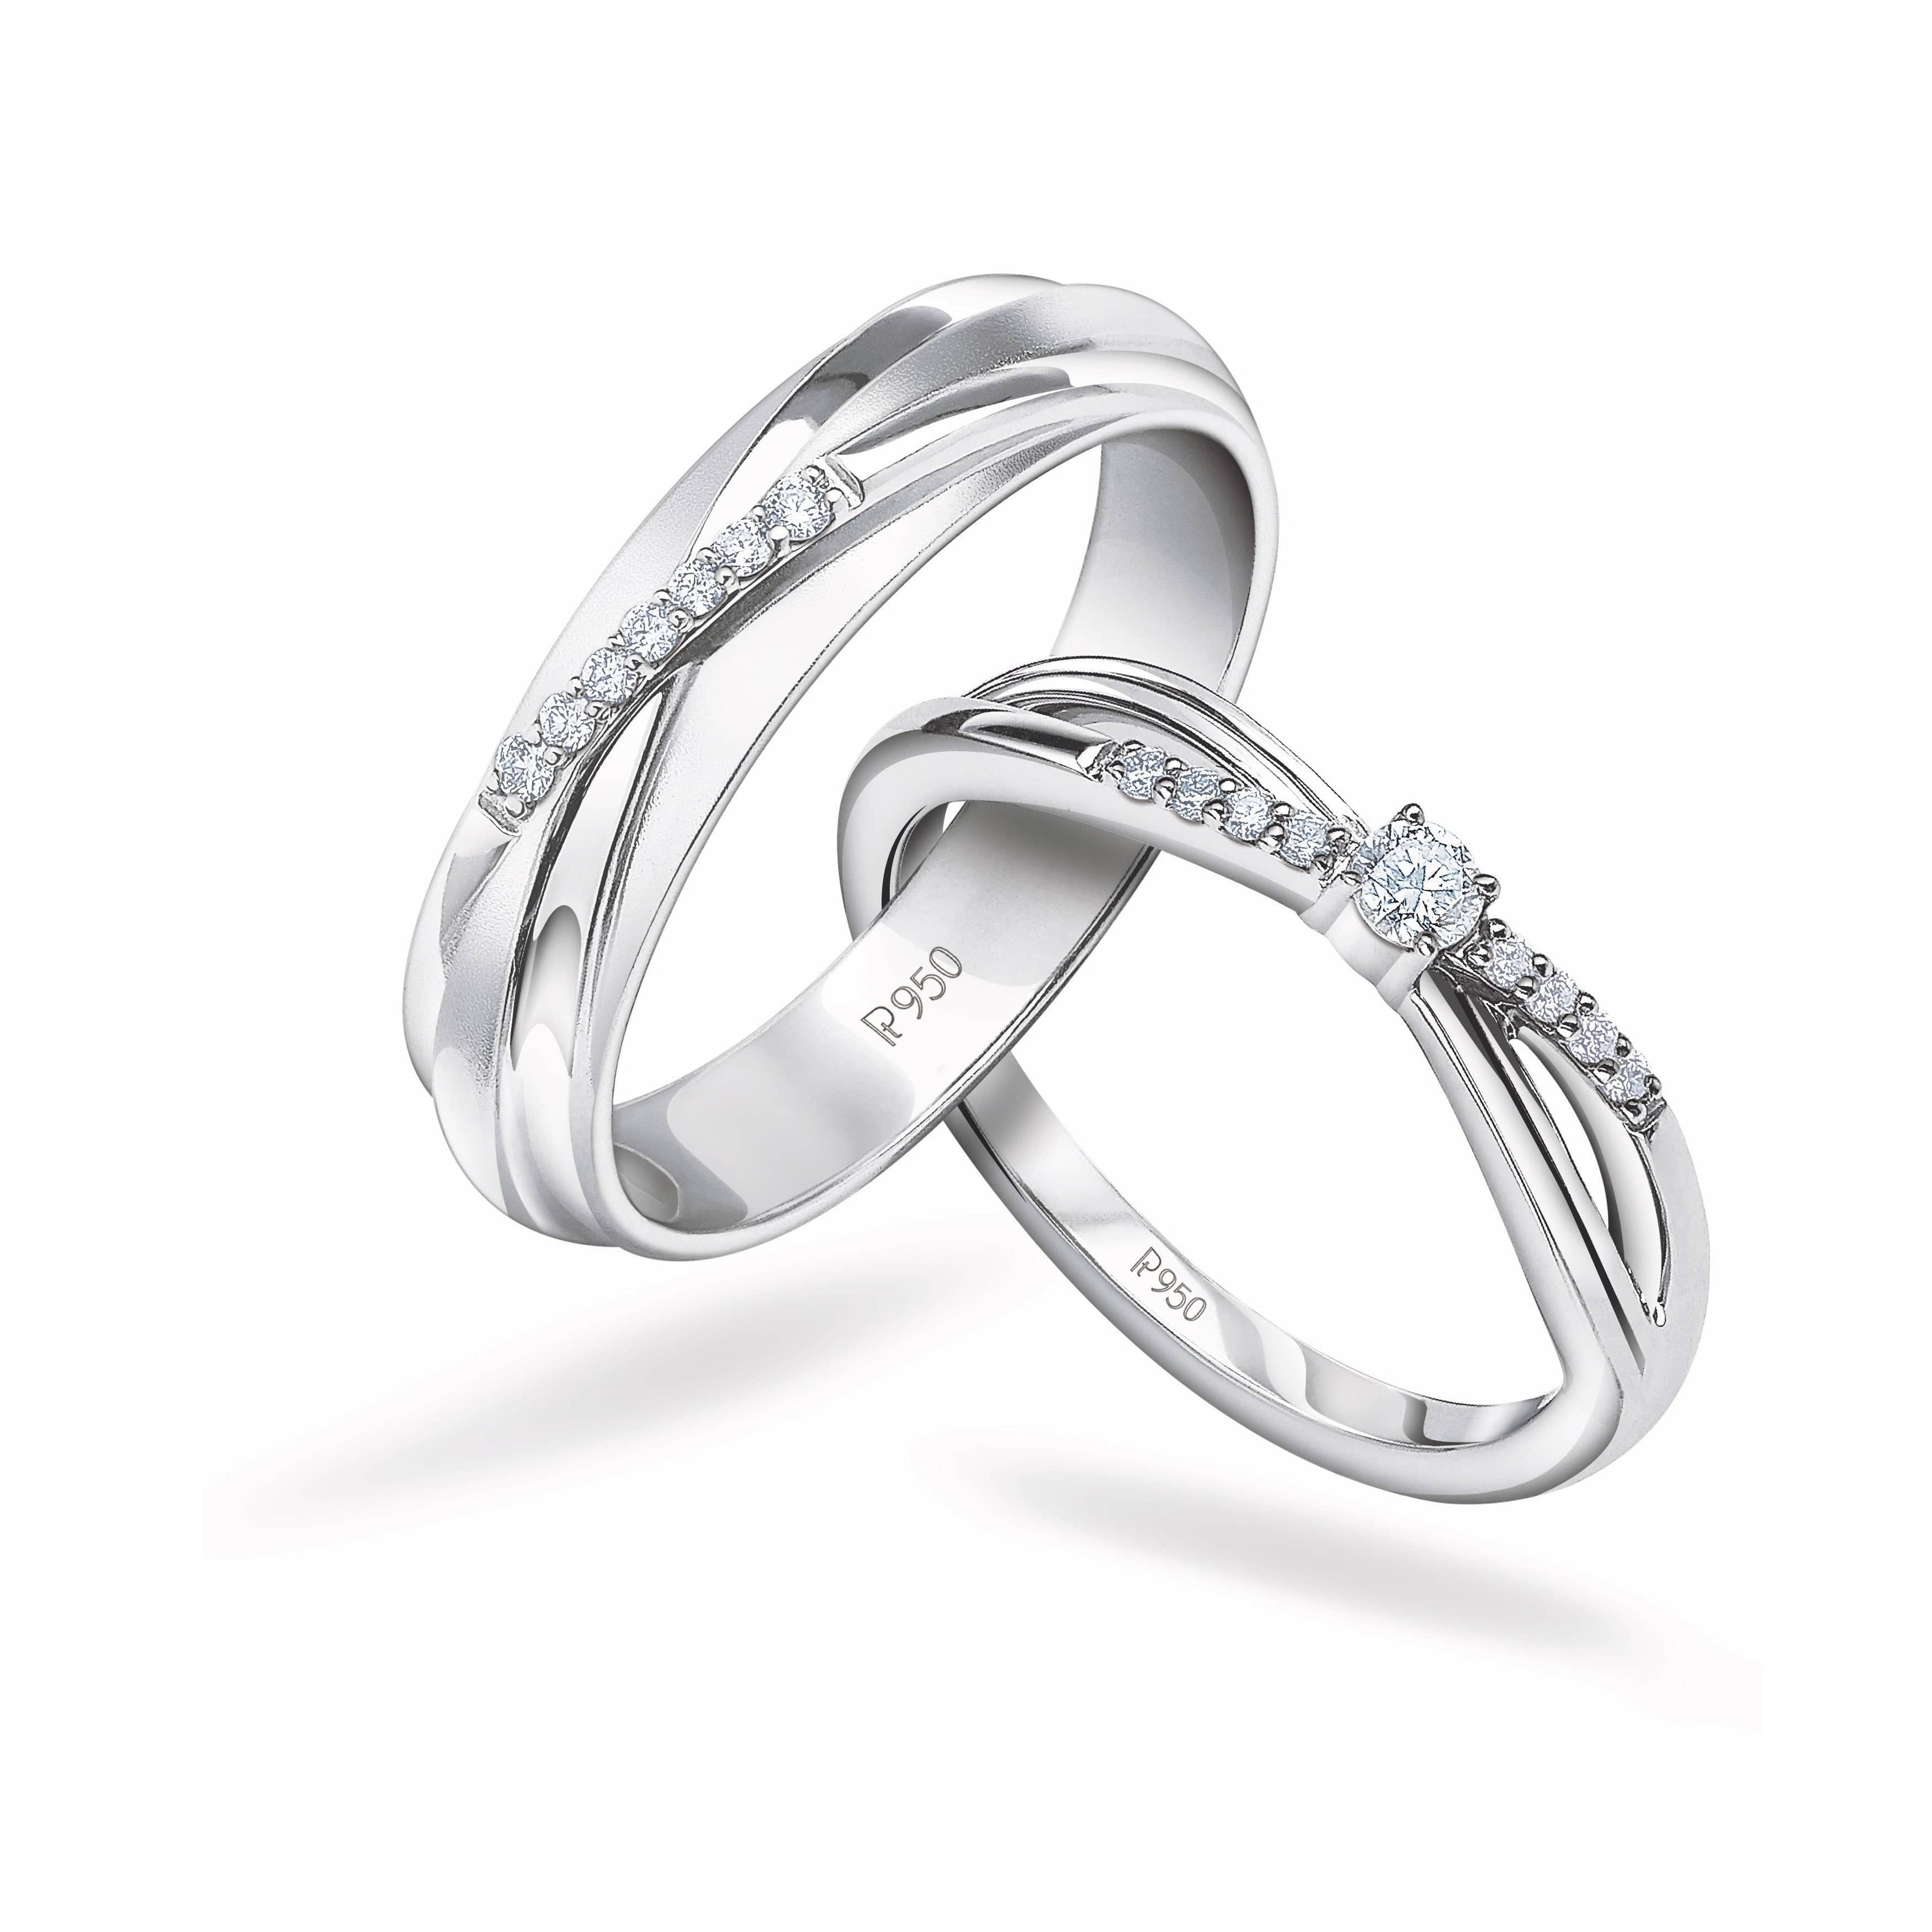 Crown Design Silver Couple Ring